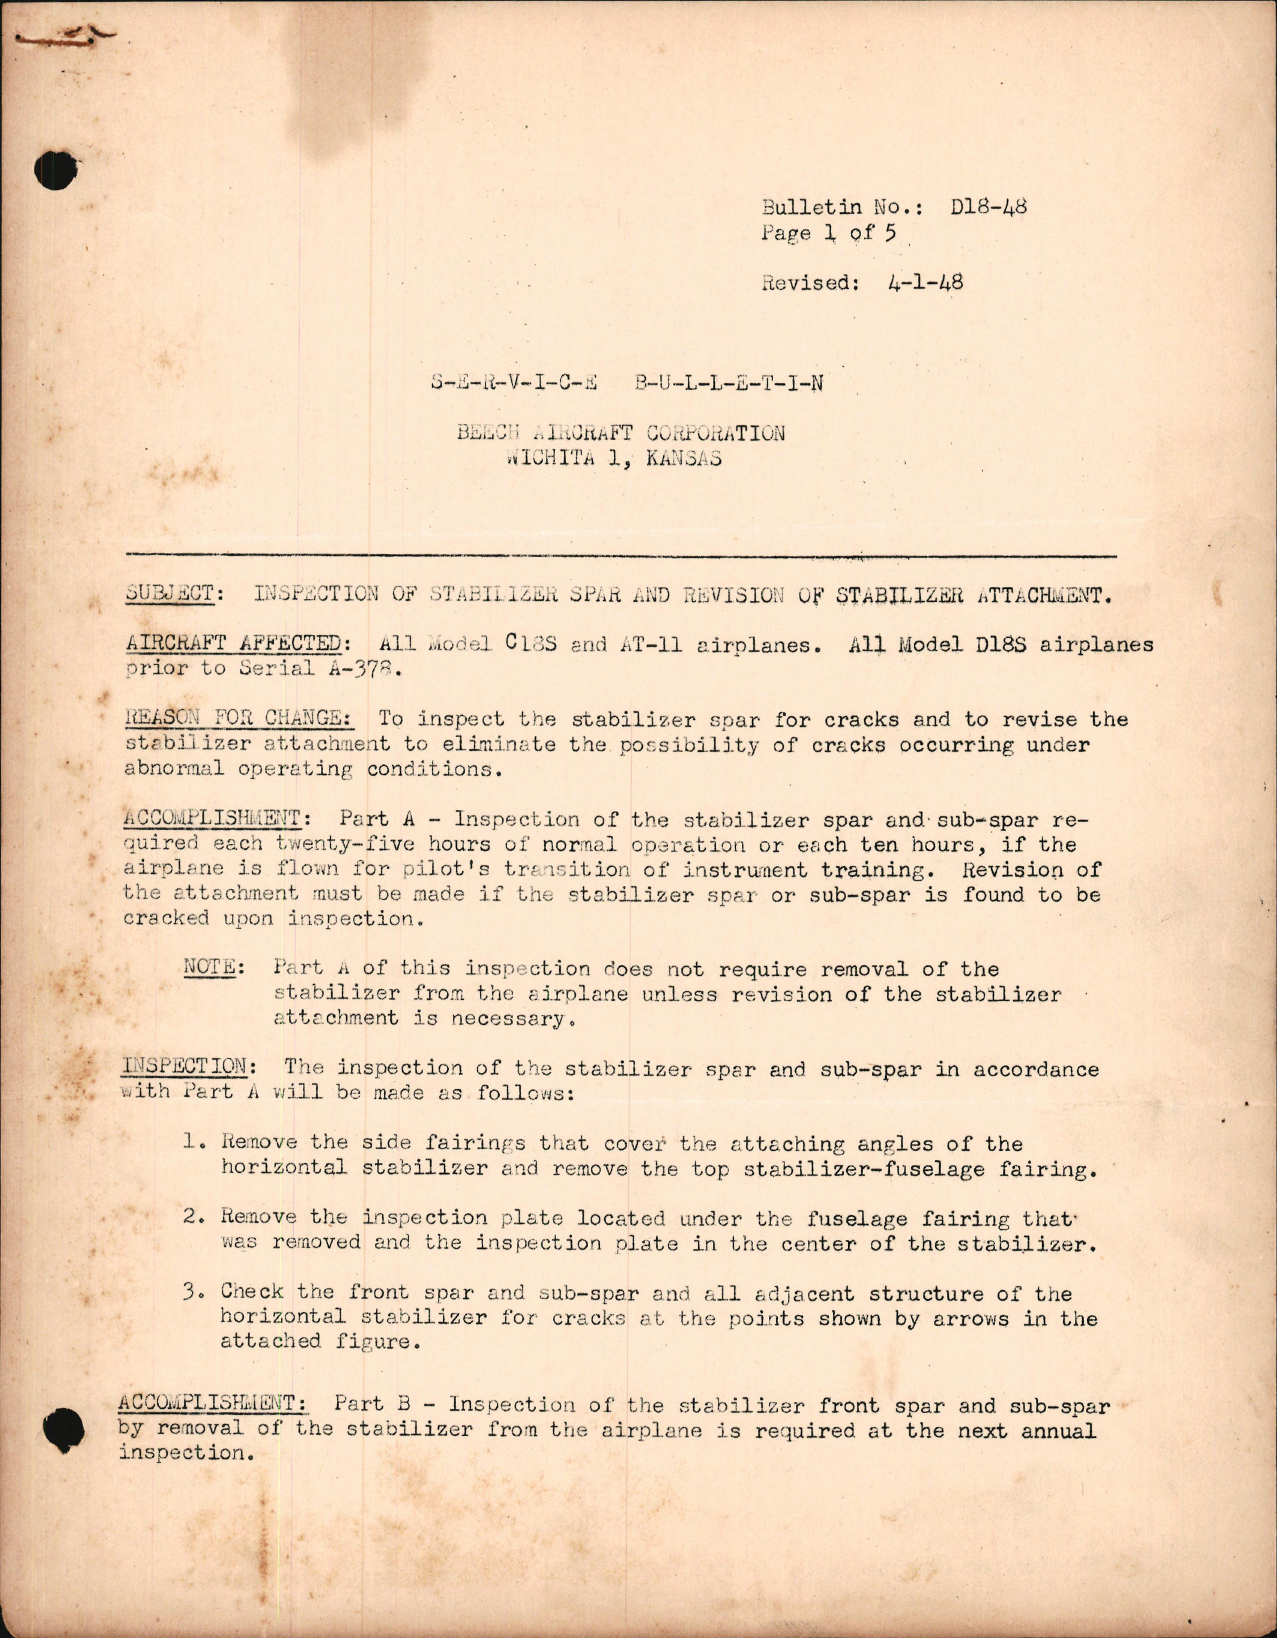 Sample page 1 from AirCorps Library document: Inspection of Stabilizer Spar and Revision of Stabilizer Attachment